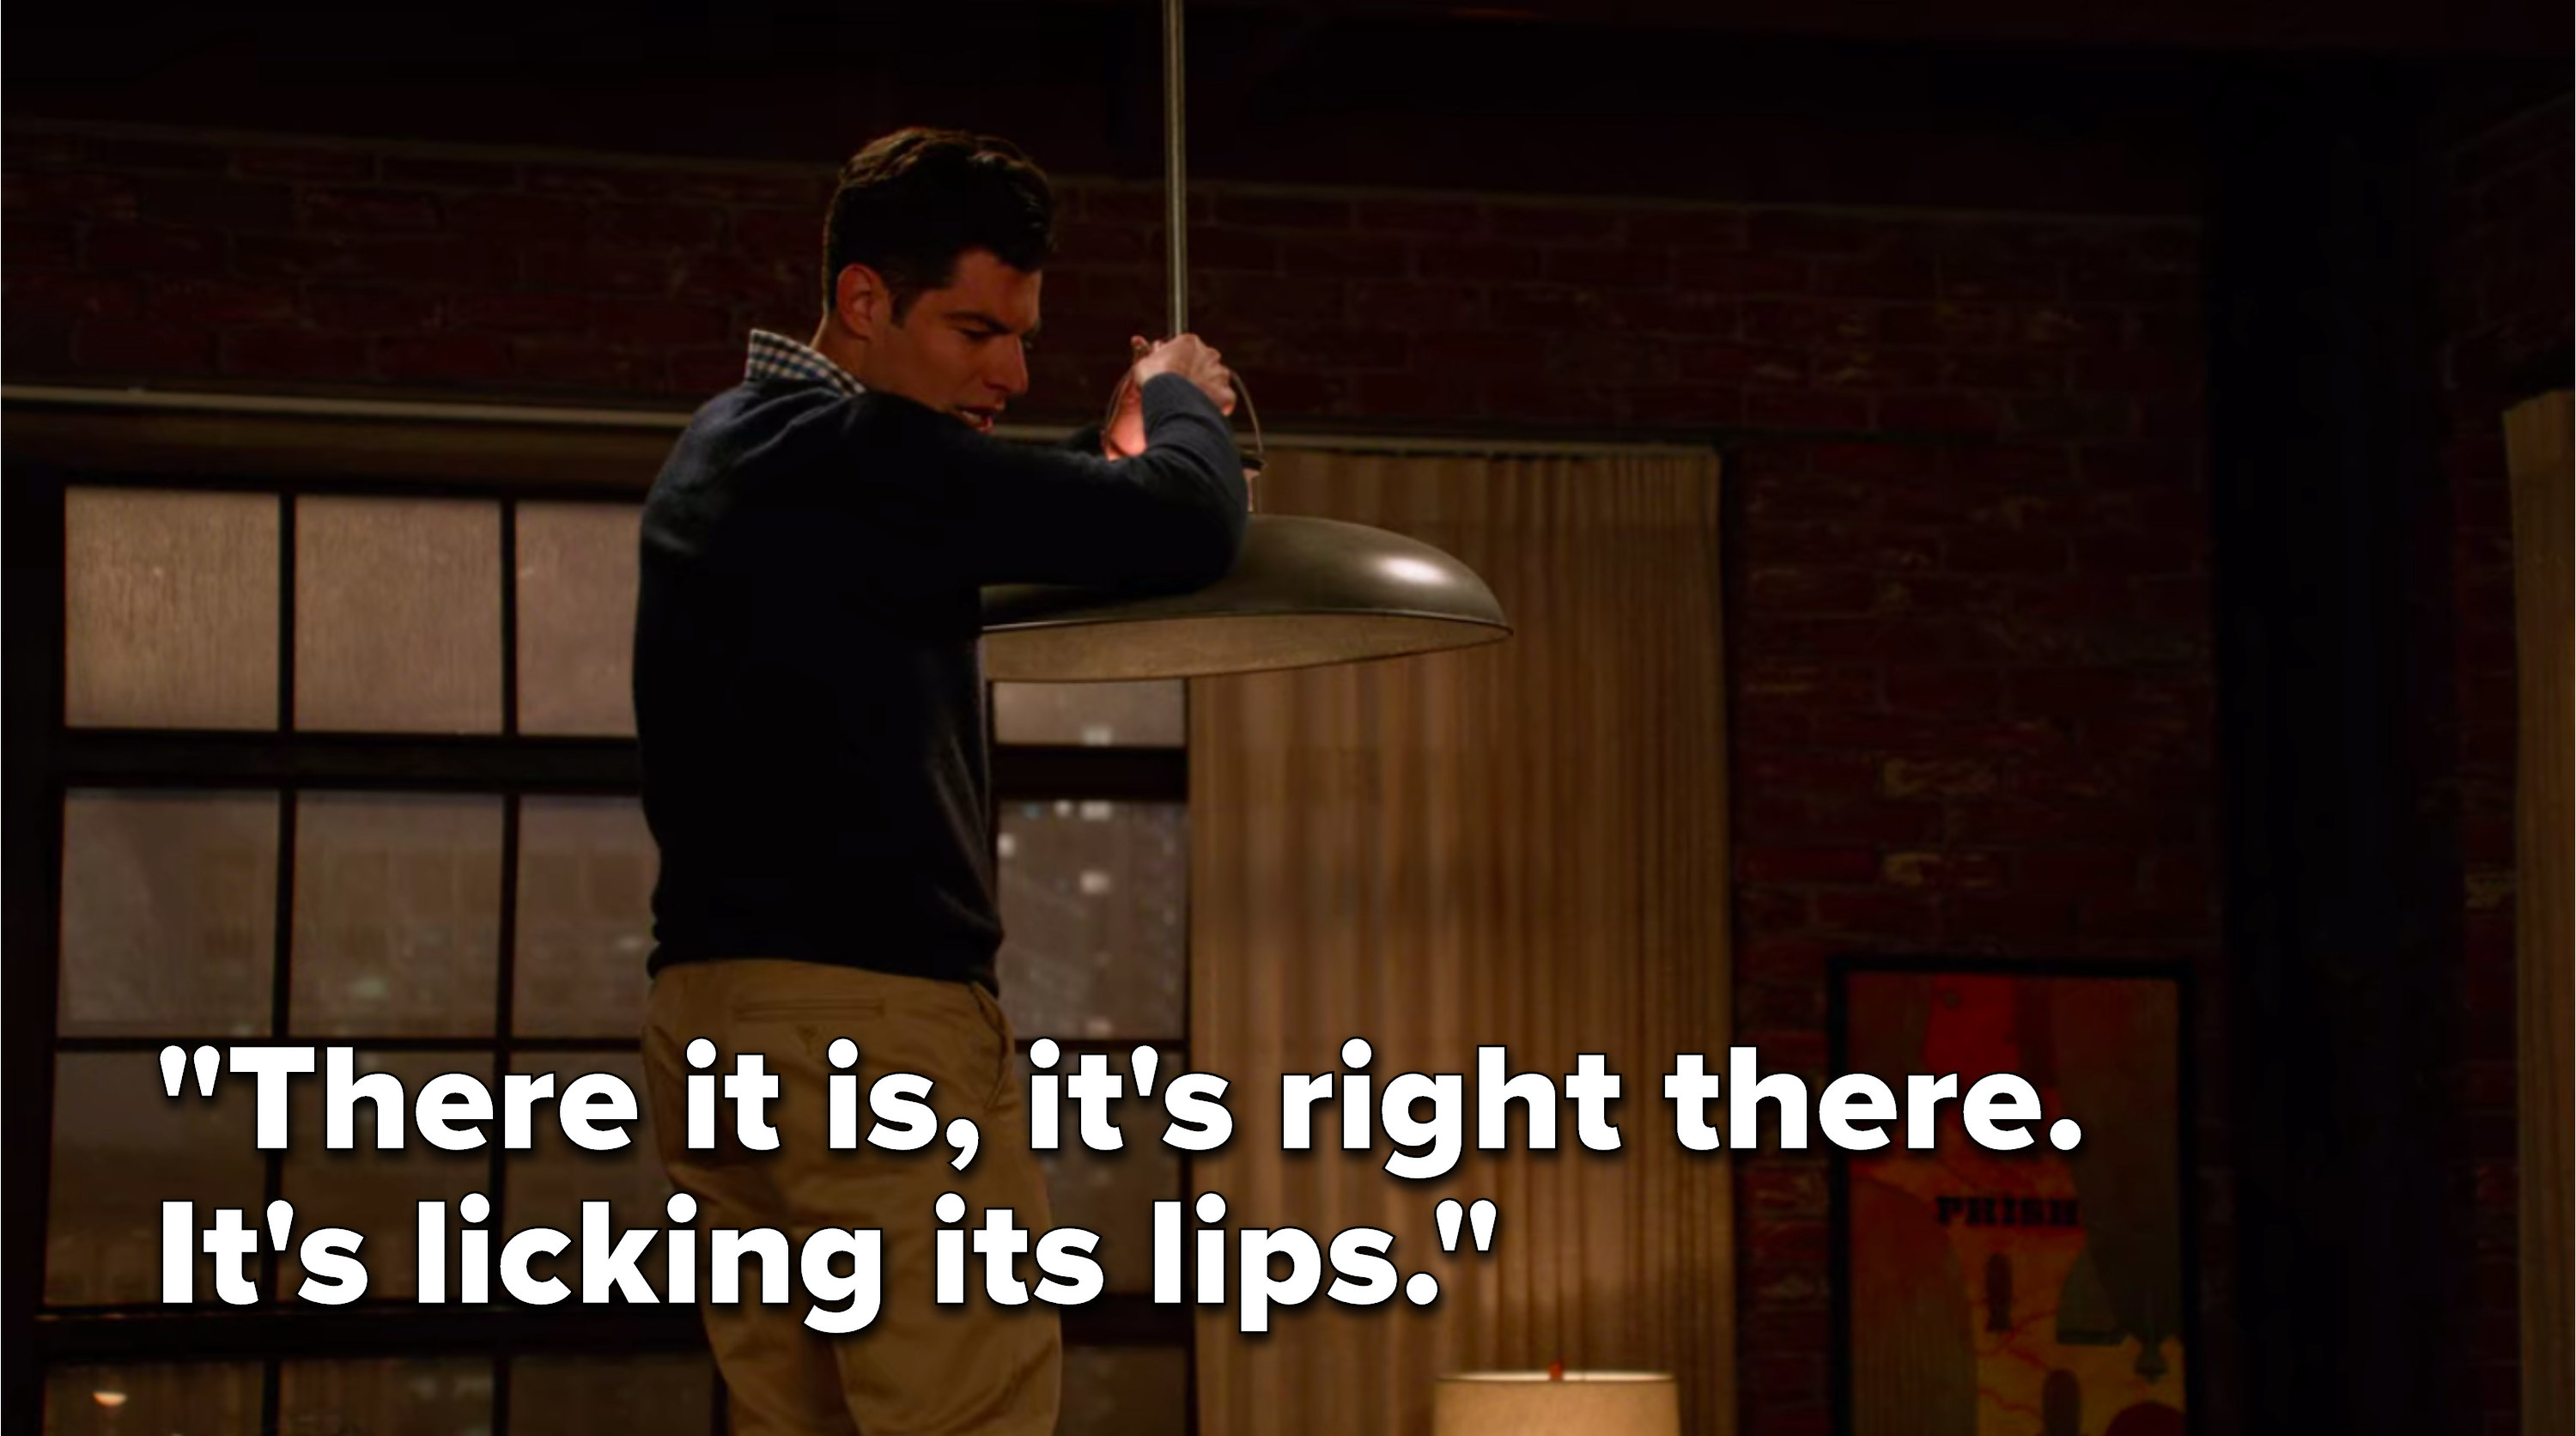 Schmidt is standing on a table holding the light fixture and says, There it is, it&#x27;s right there, it&#x27;s licking its lips